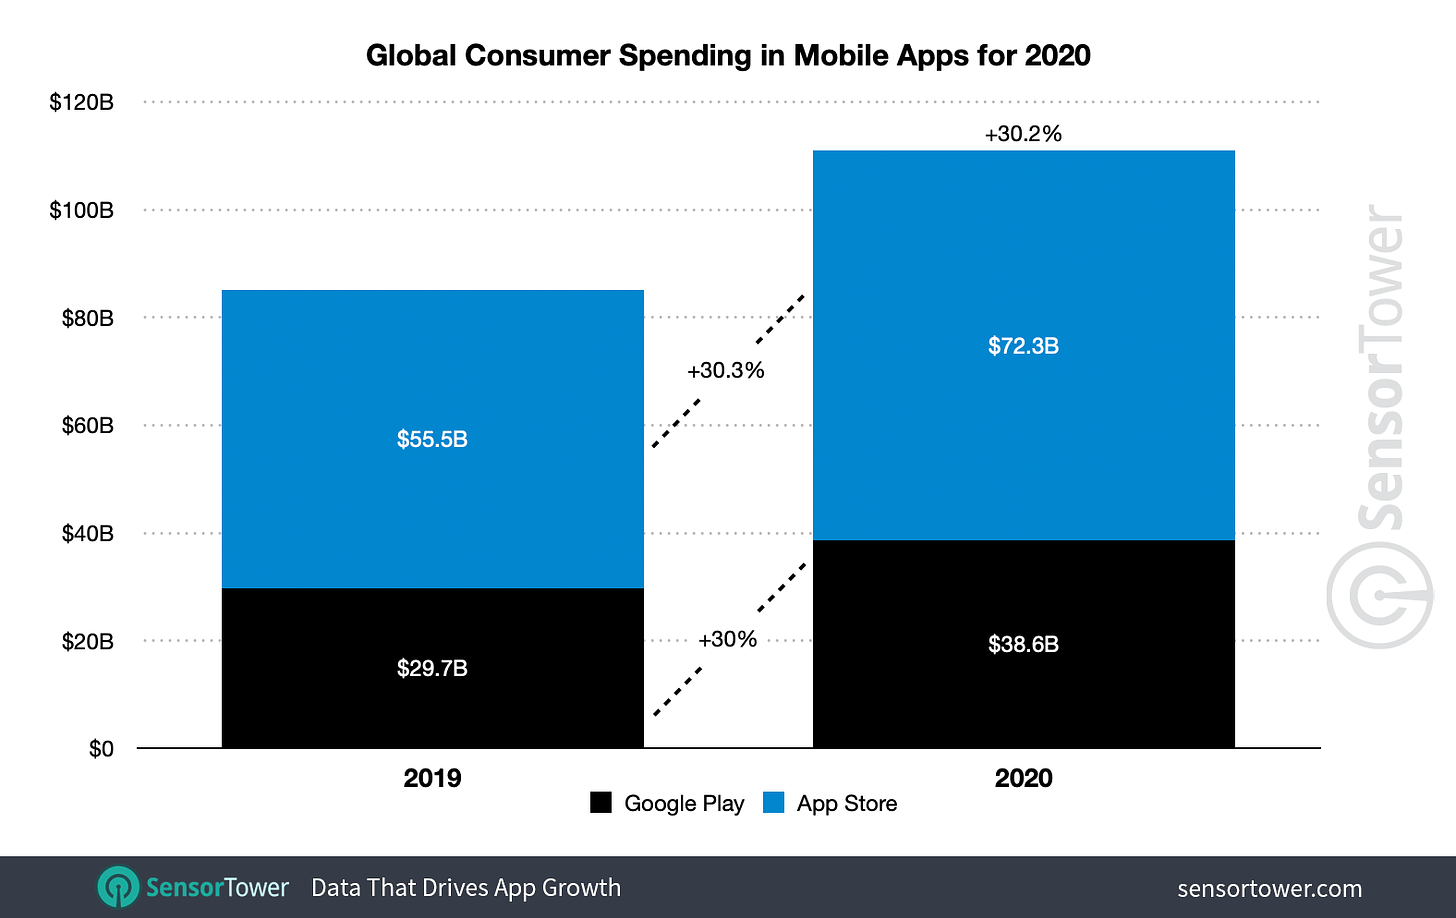 Global consumer spending in non-game apps grew 42 percent to $31.4 billion in 2020.